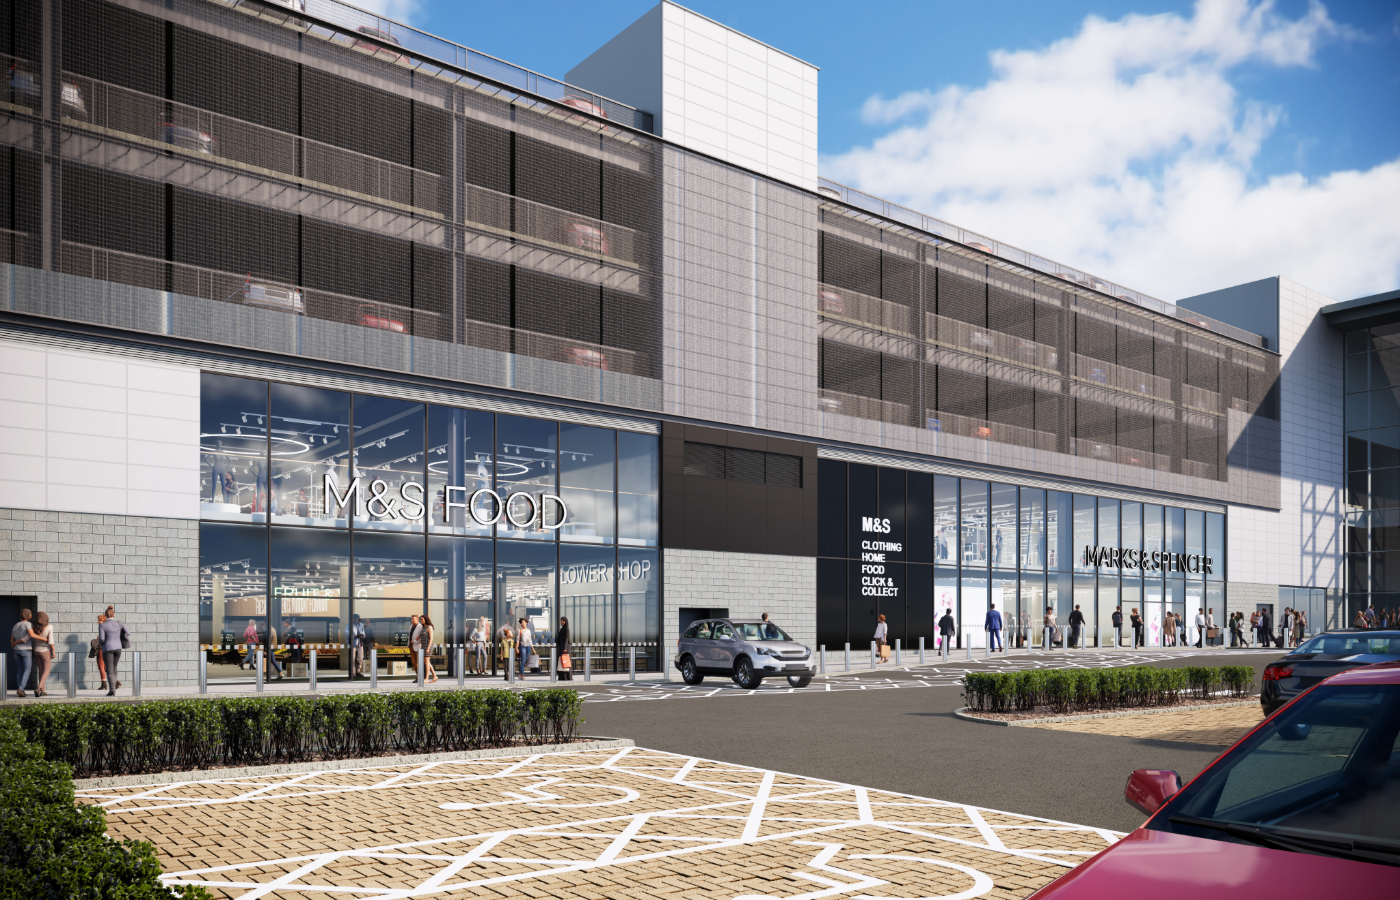 A £15m development to Aberdeen's Union Square will include a spacious new food hall. Photo: Marks and Spencer.